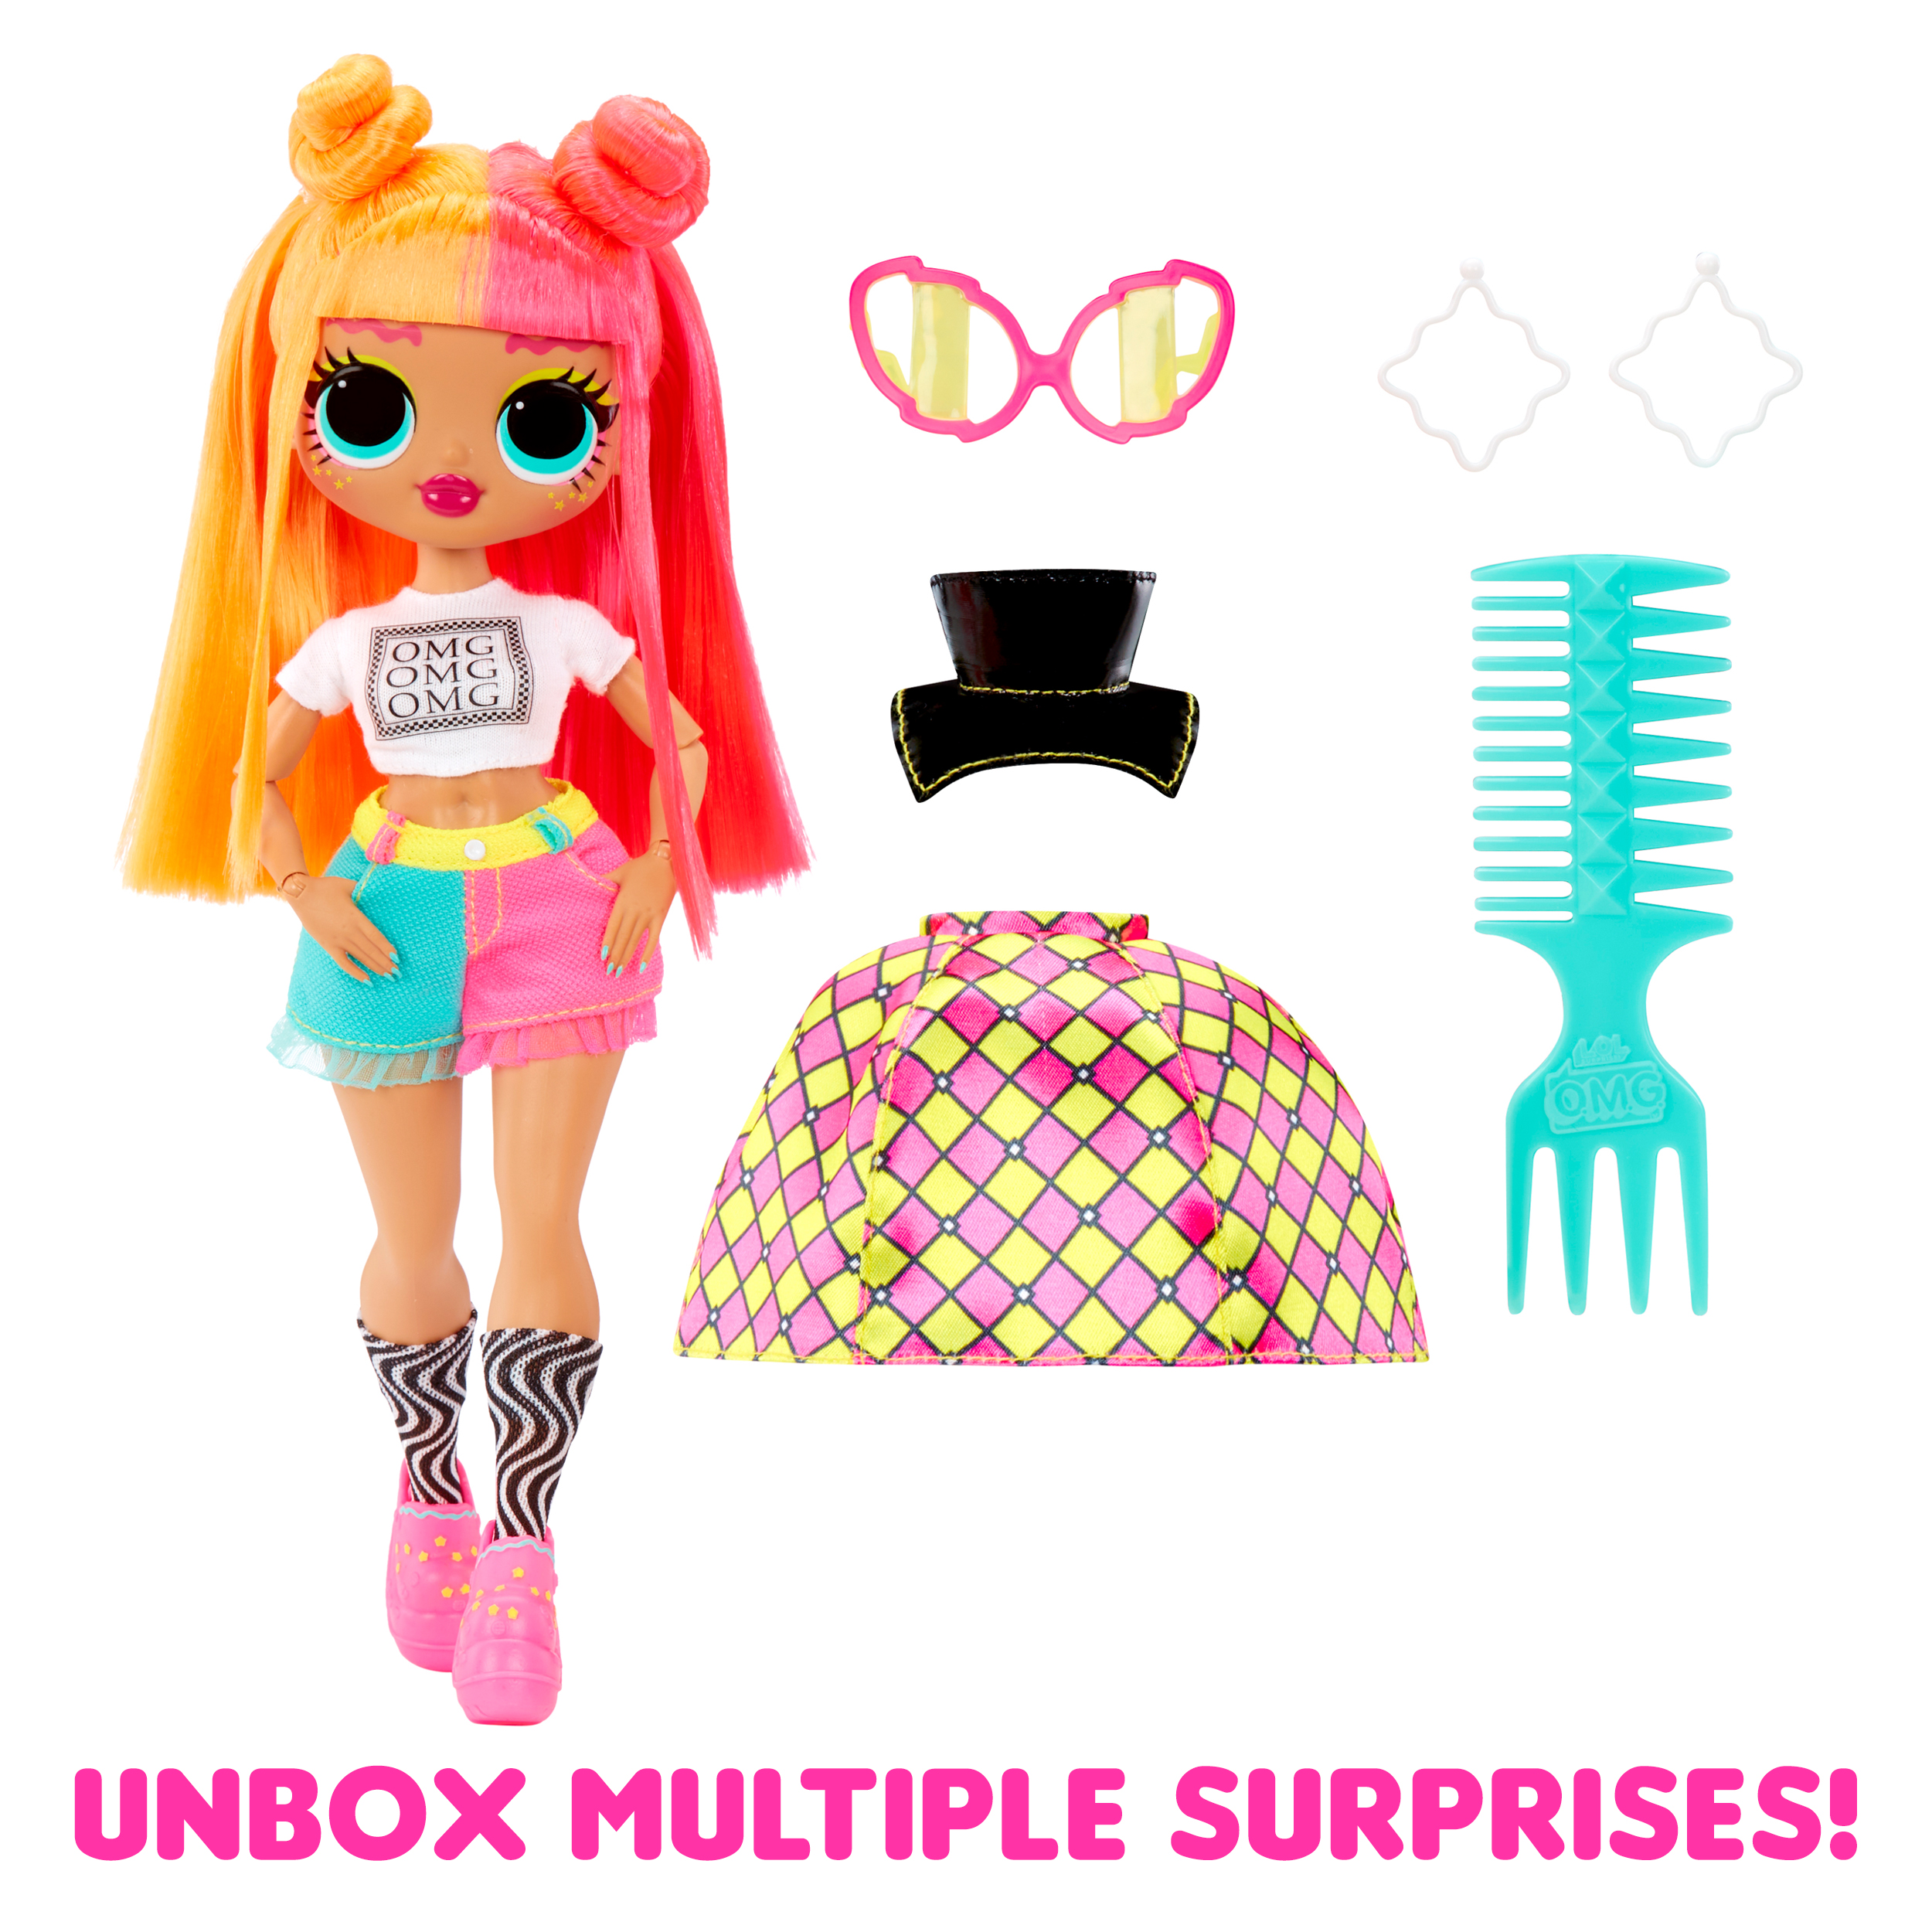 LOL Surprise OMG Neonlicious Fashion Doll with Multiple Surprises Including Transforming Fashions and Fabulous Accessories, Kids Gift Ages 4+ - image 4 of 8